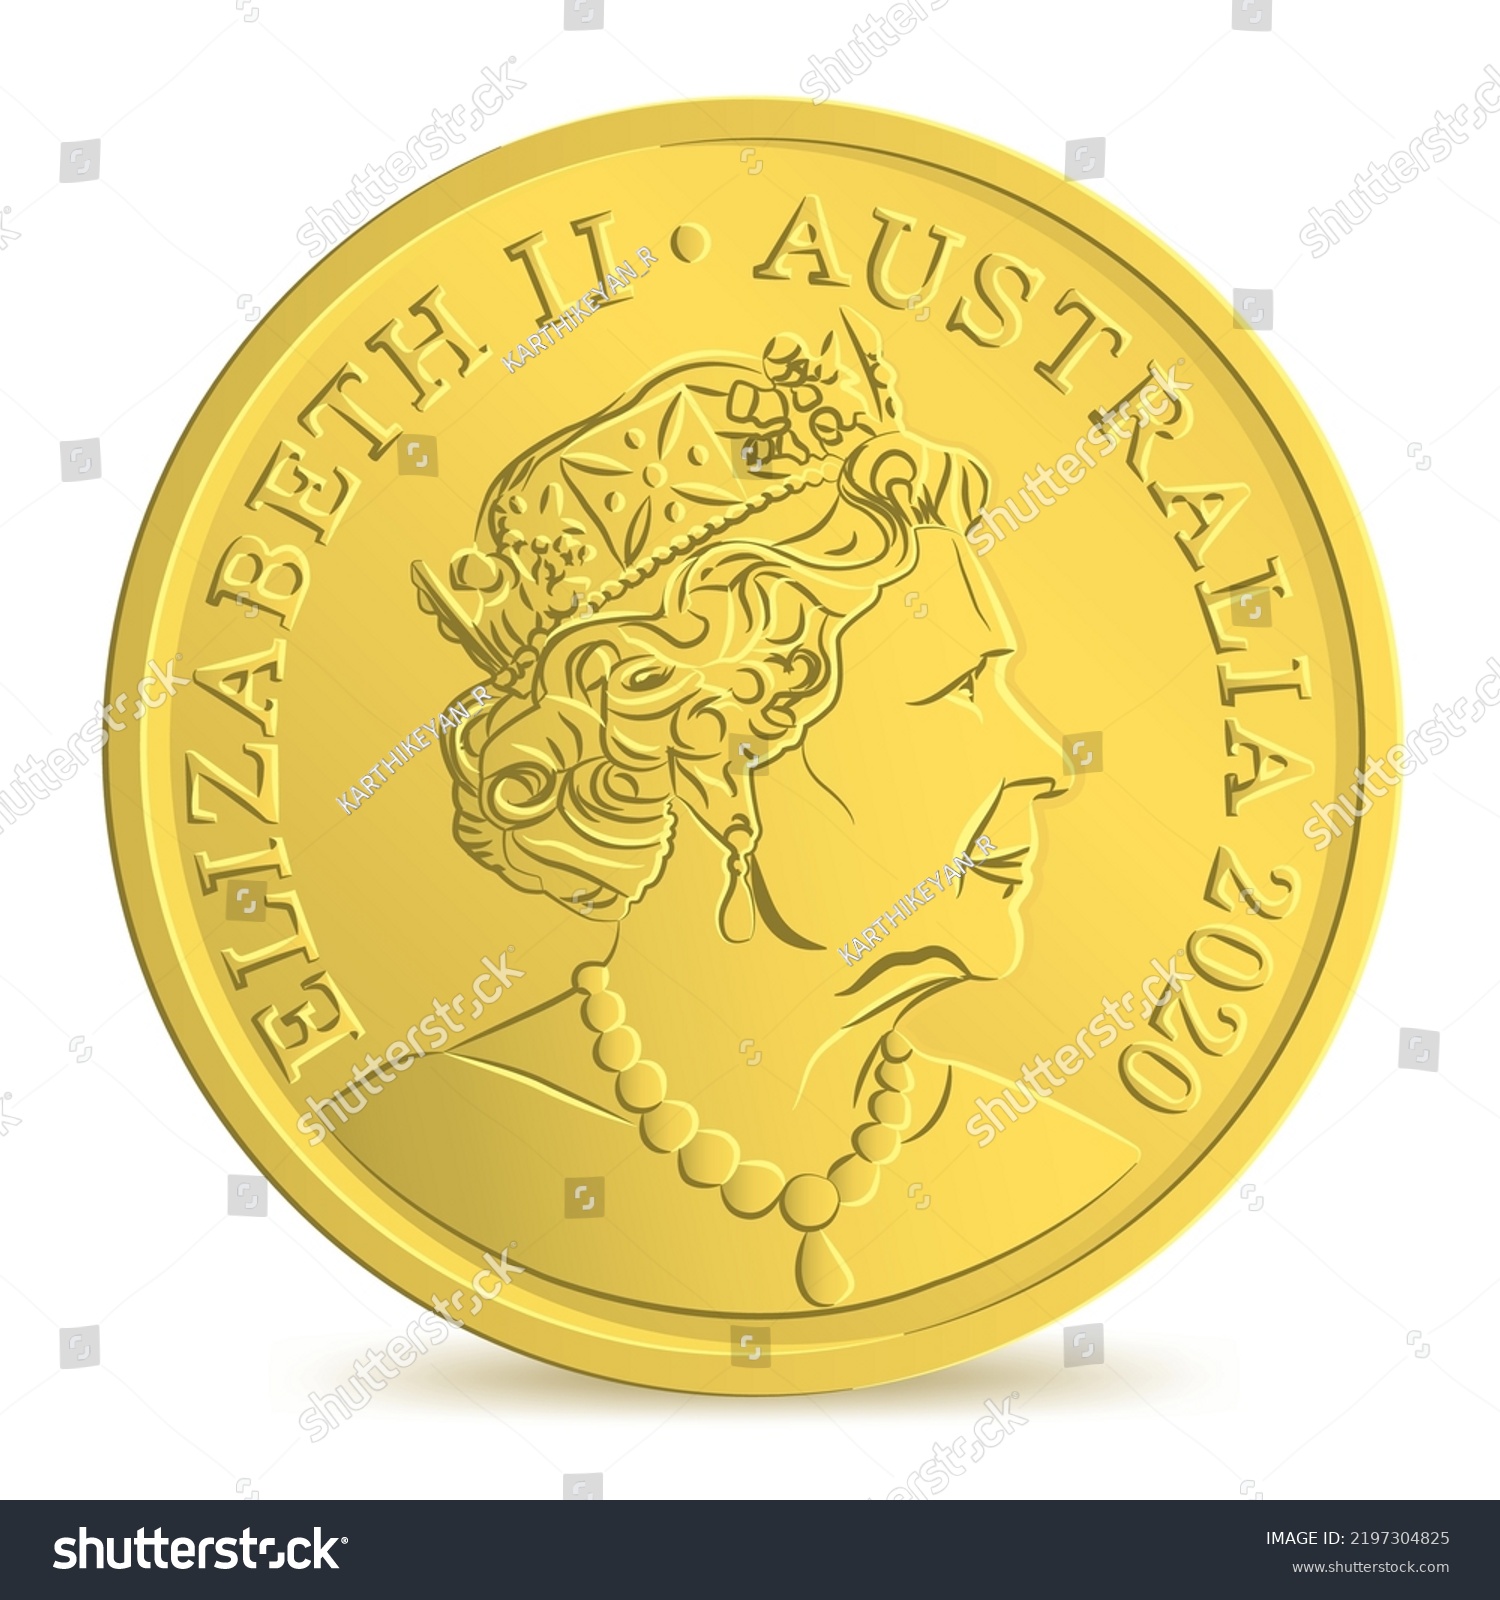 SVG of Obverse of Australian dollar coin isolated on white background in vector illustration svg